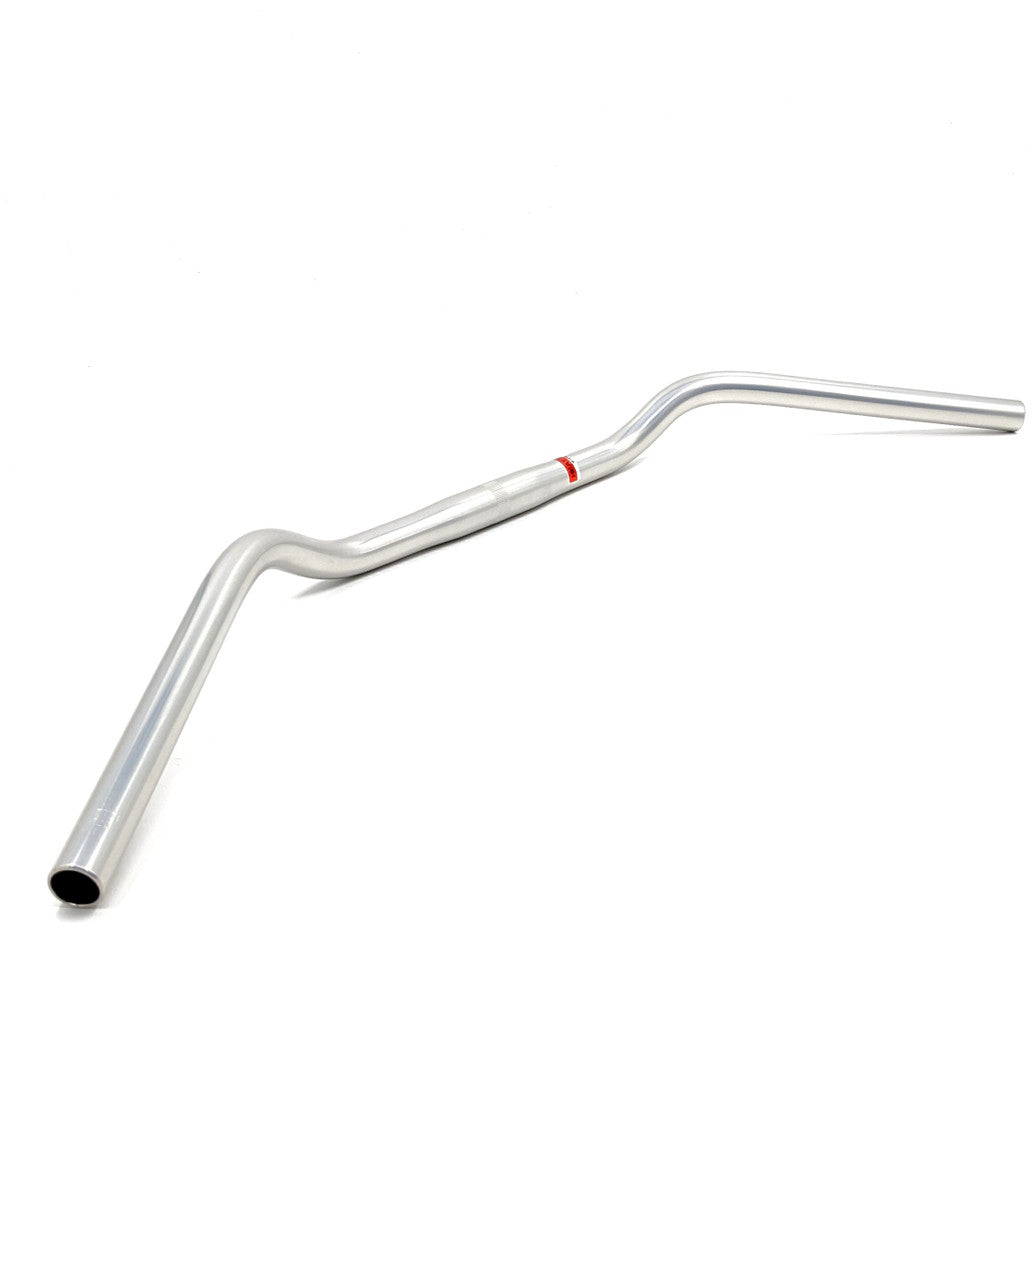 Nitto x Crumbworks KT bar (silver)